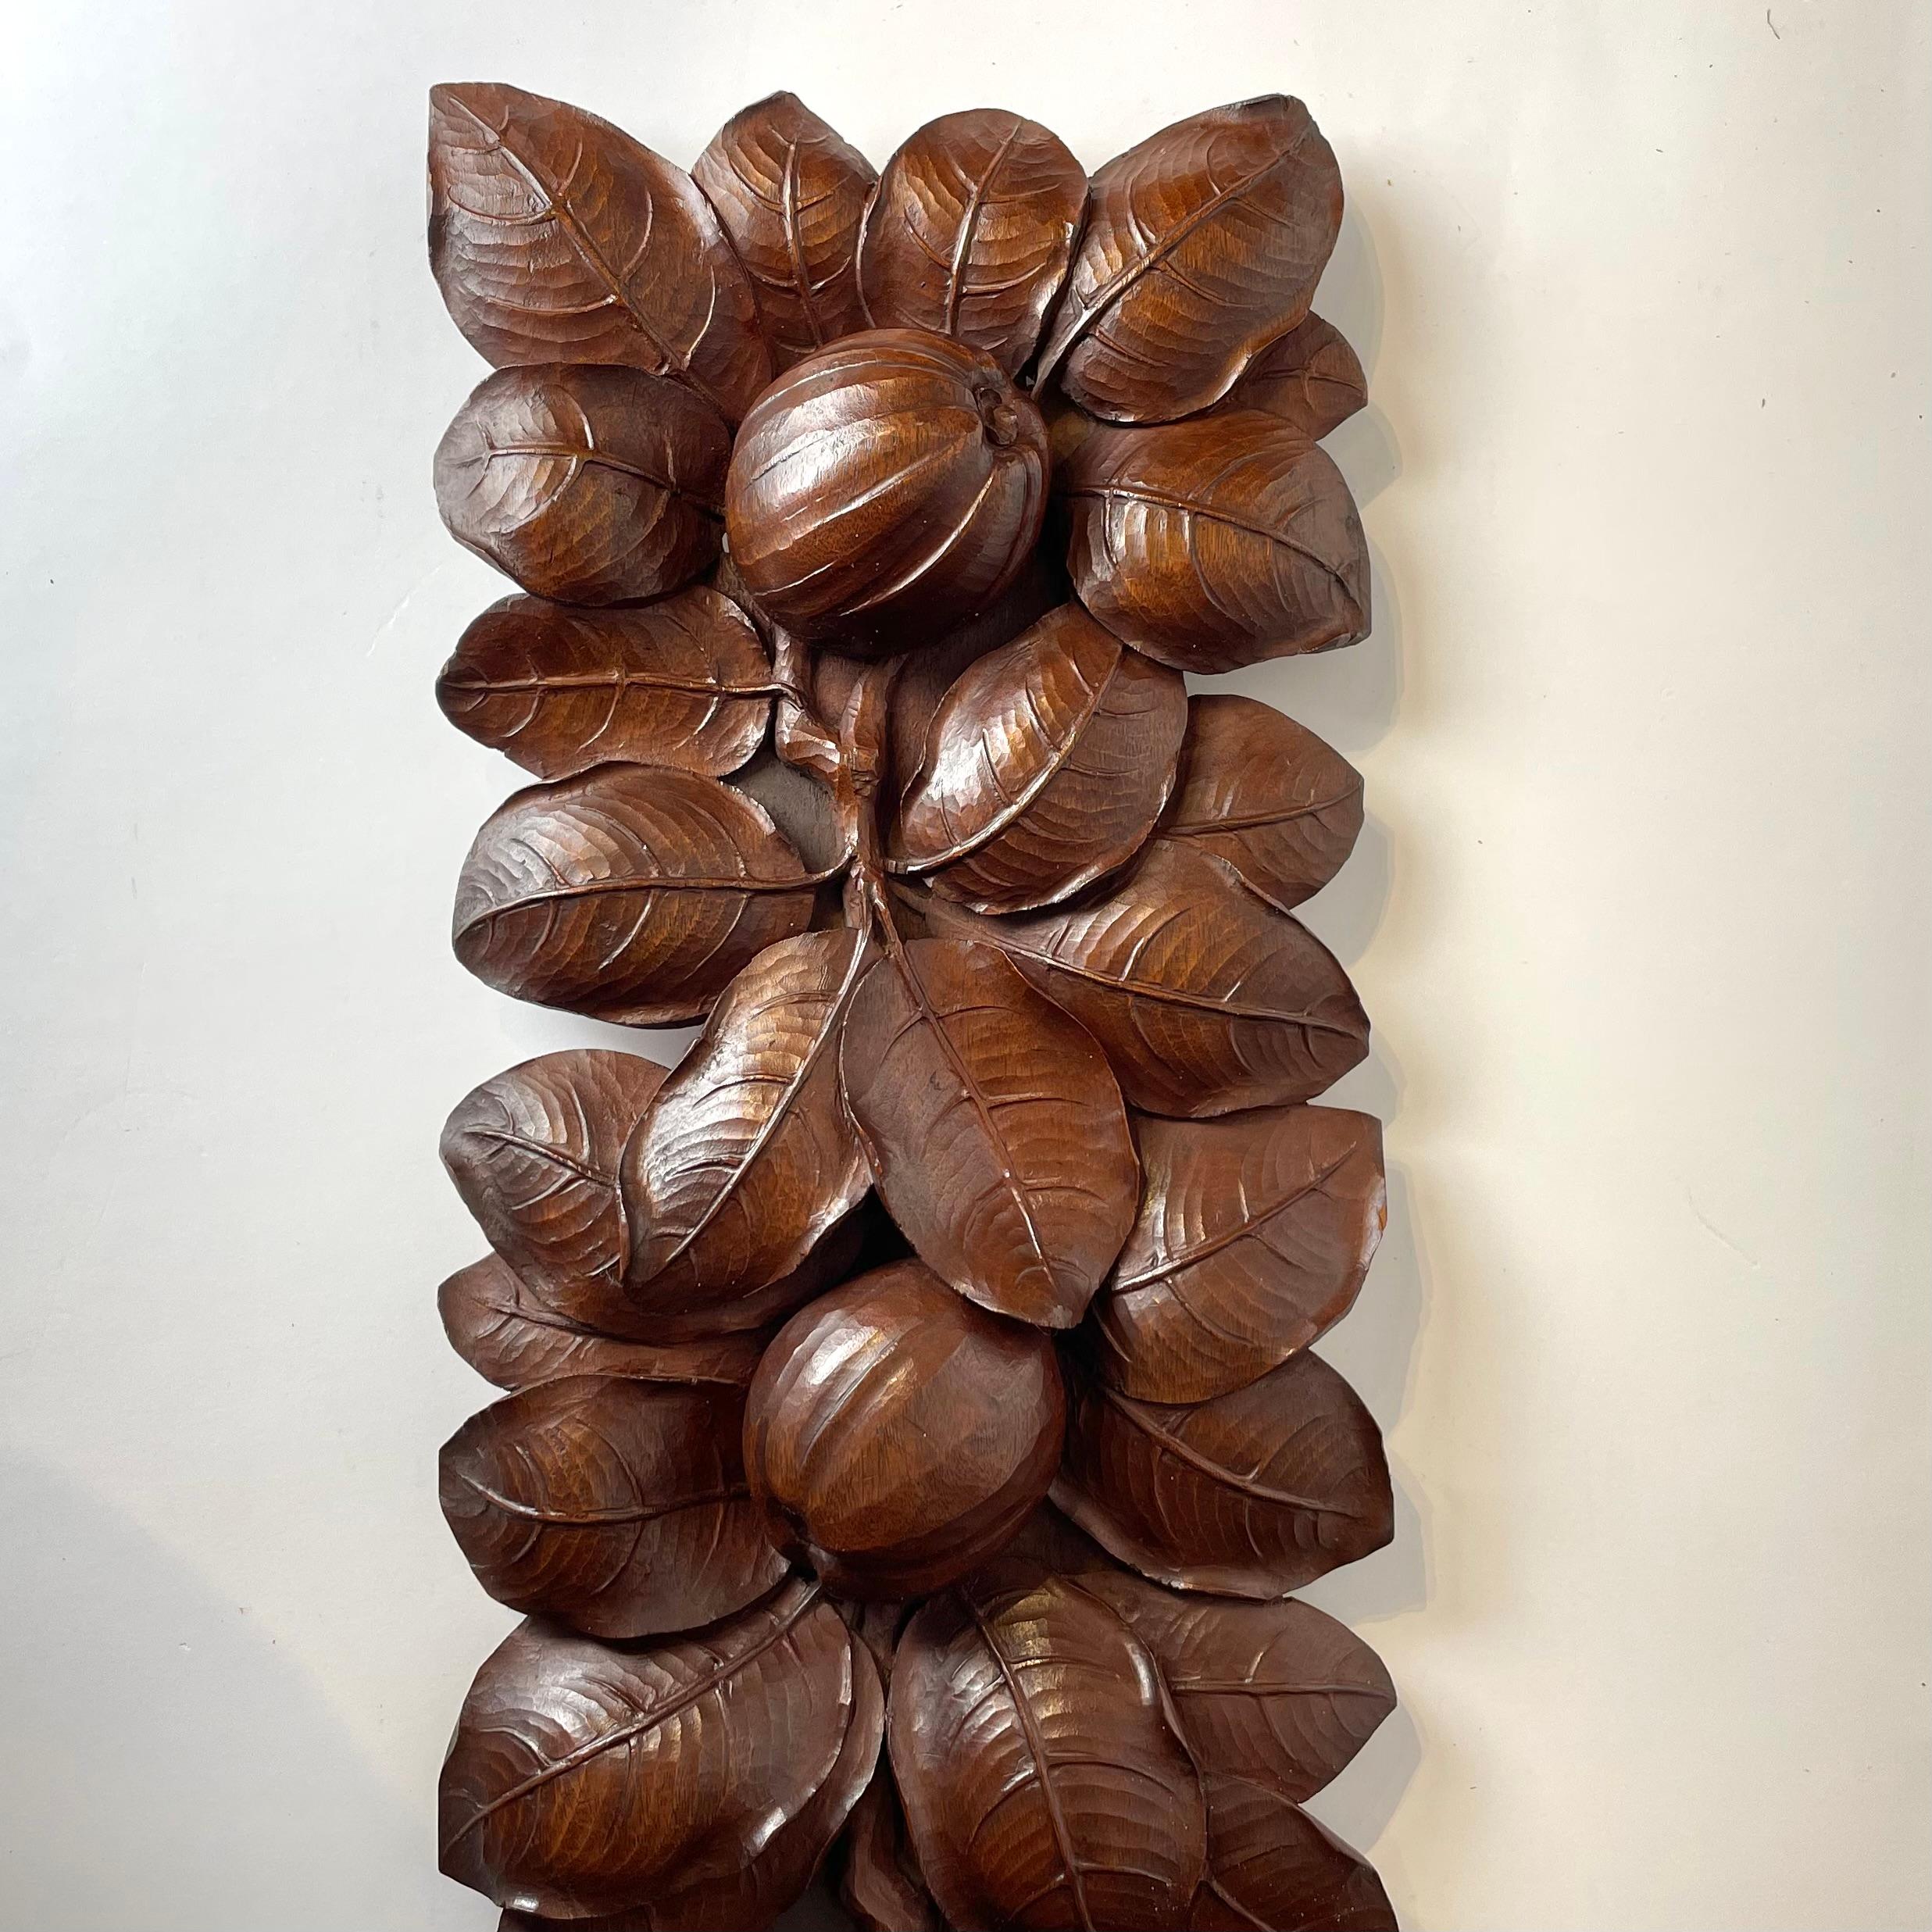 Walnut Woodcarved Decorative Element Depicting Apples Foliage Early 20th Century For Sale 2